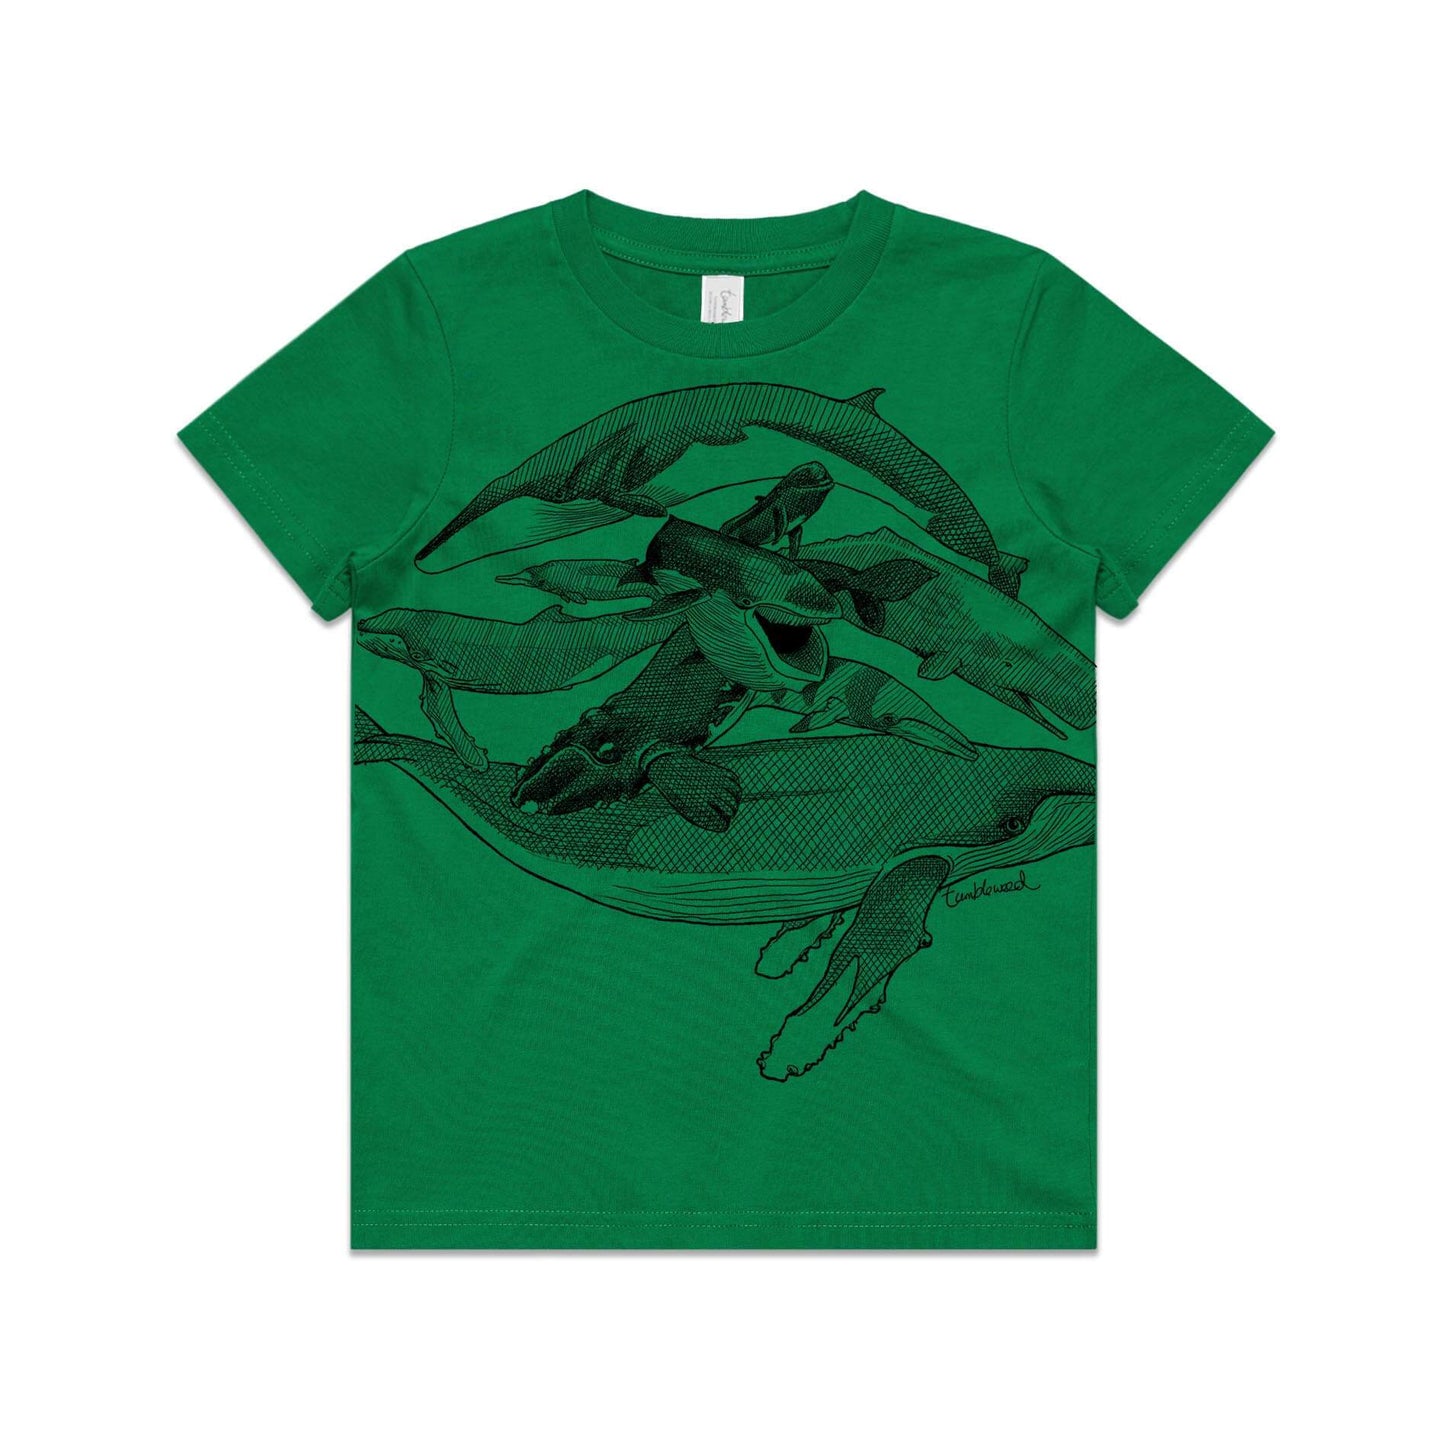 Green, cotton kids' t-shirt with screen printed Kids whales design.